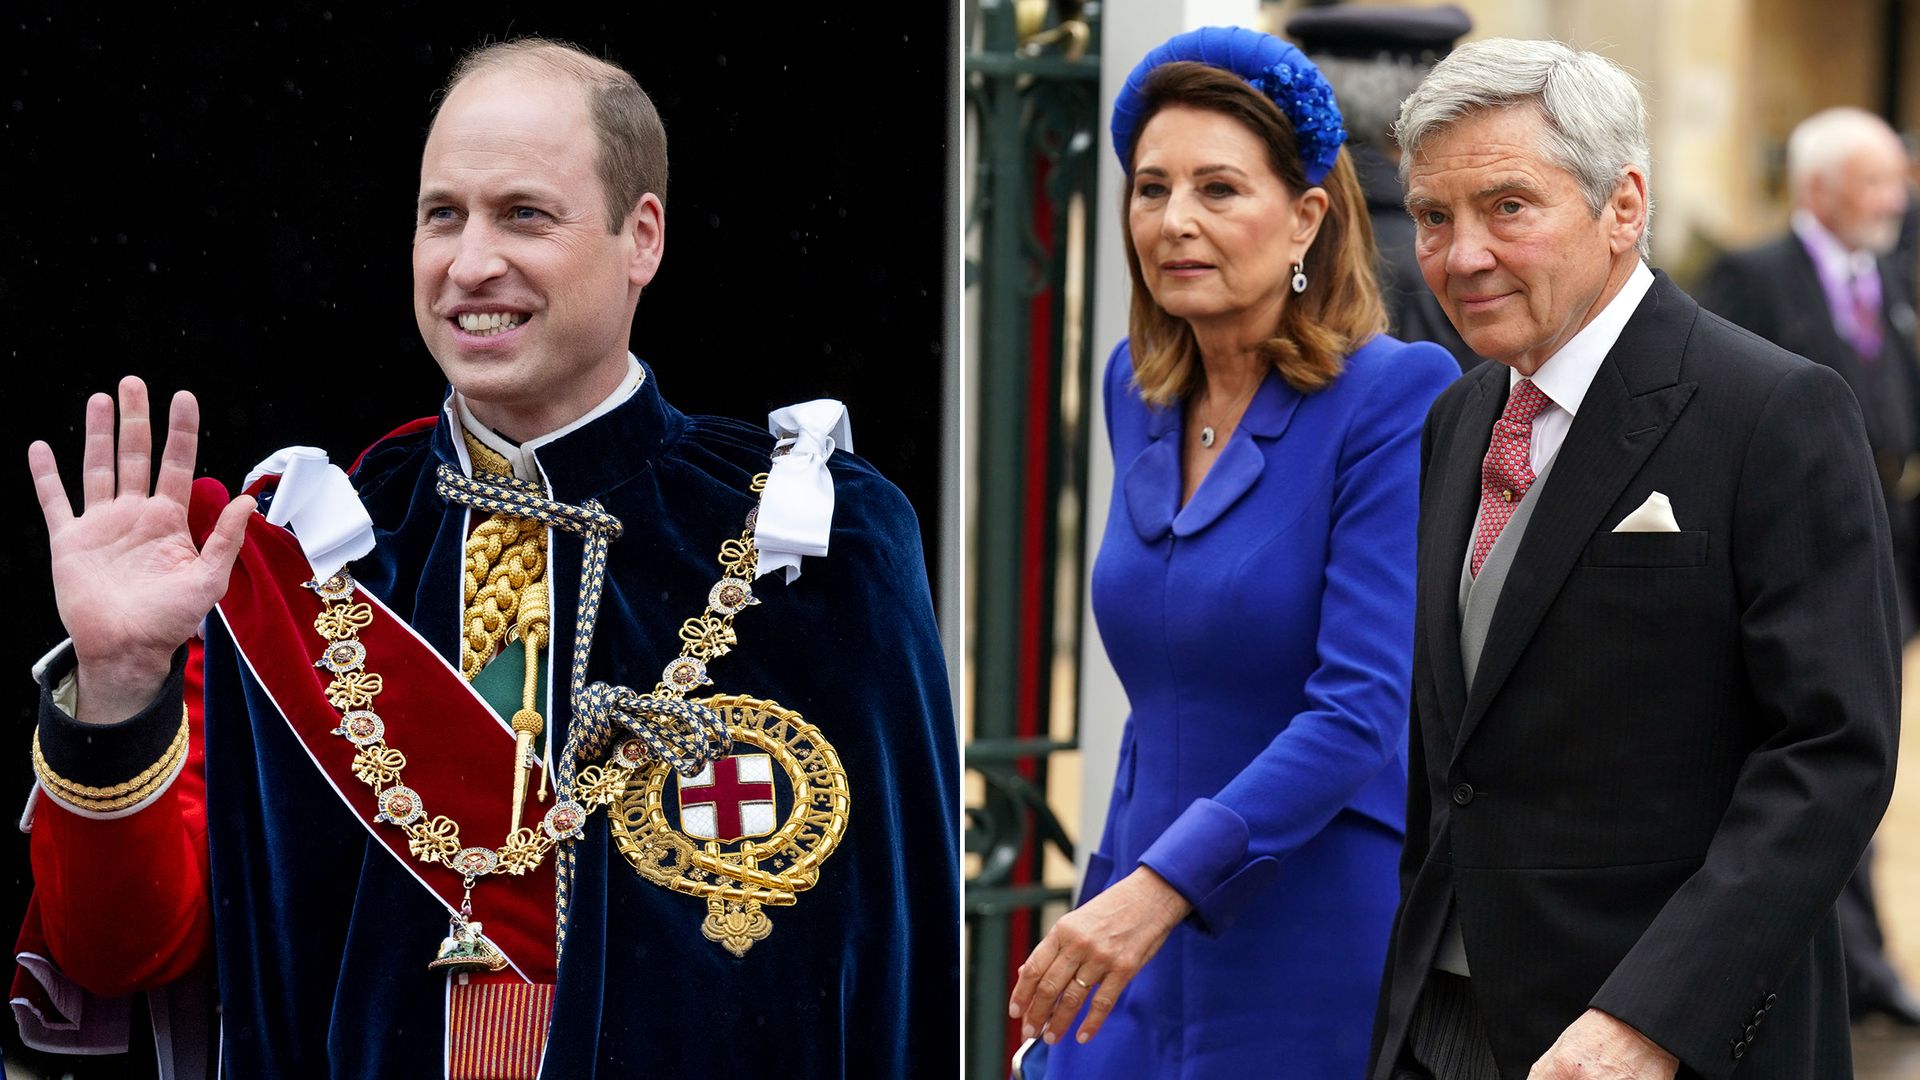 Split of Prince William and Carole and Michael Middleton at coronation